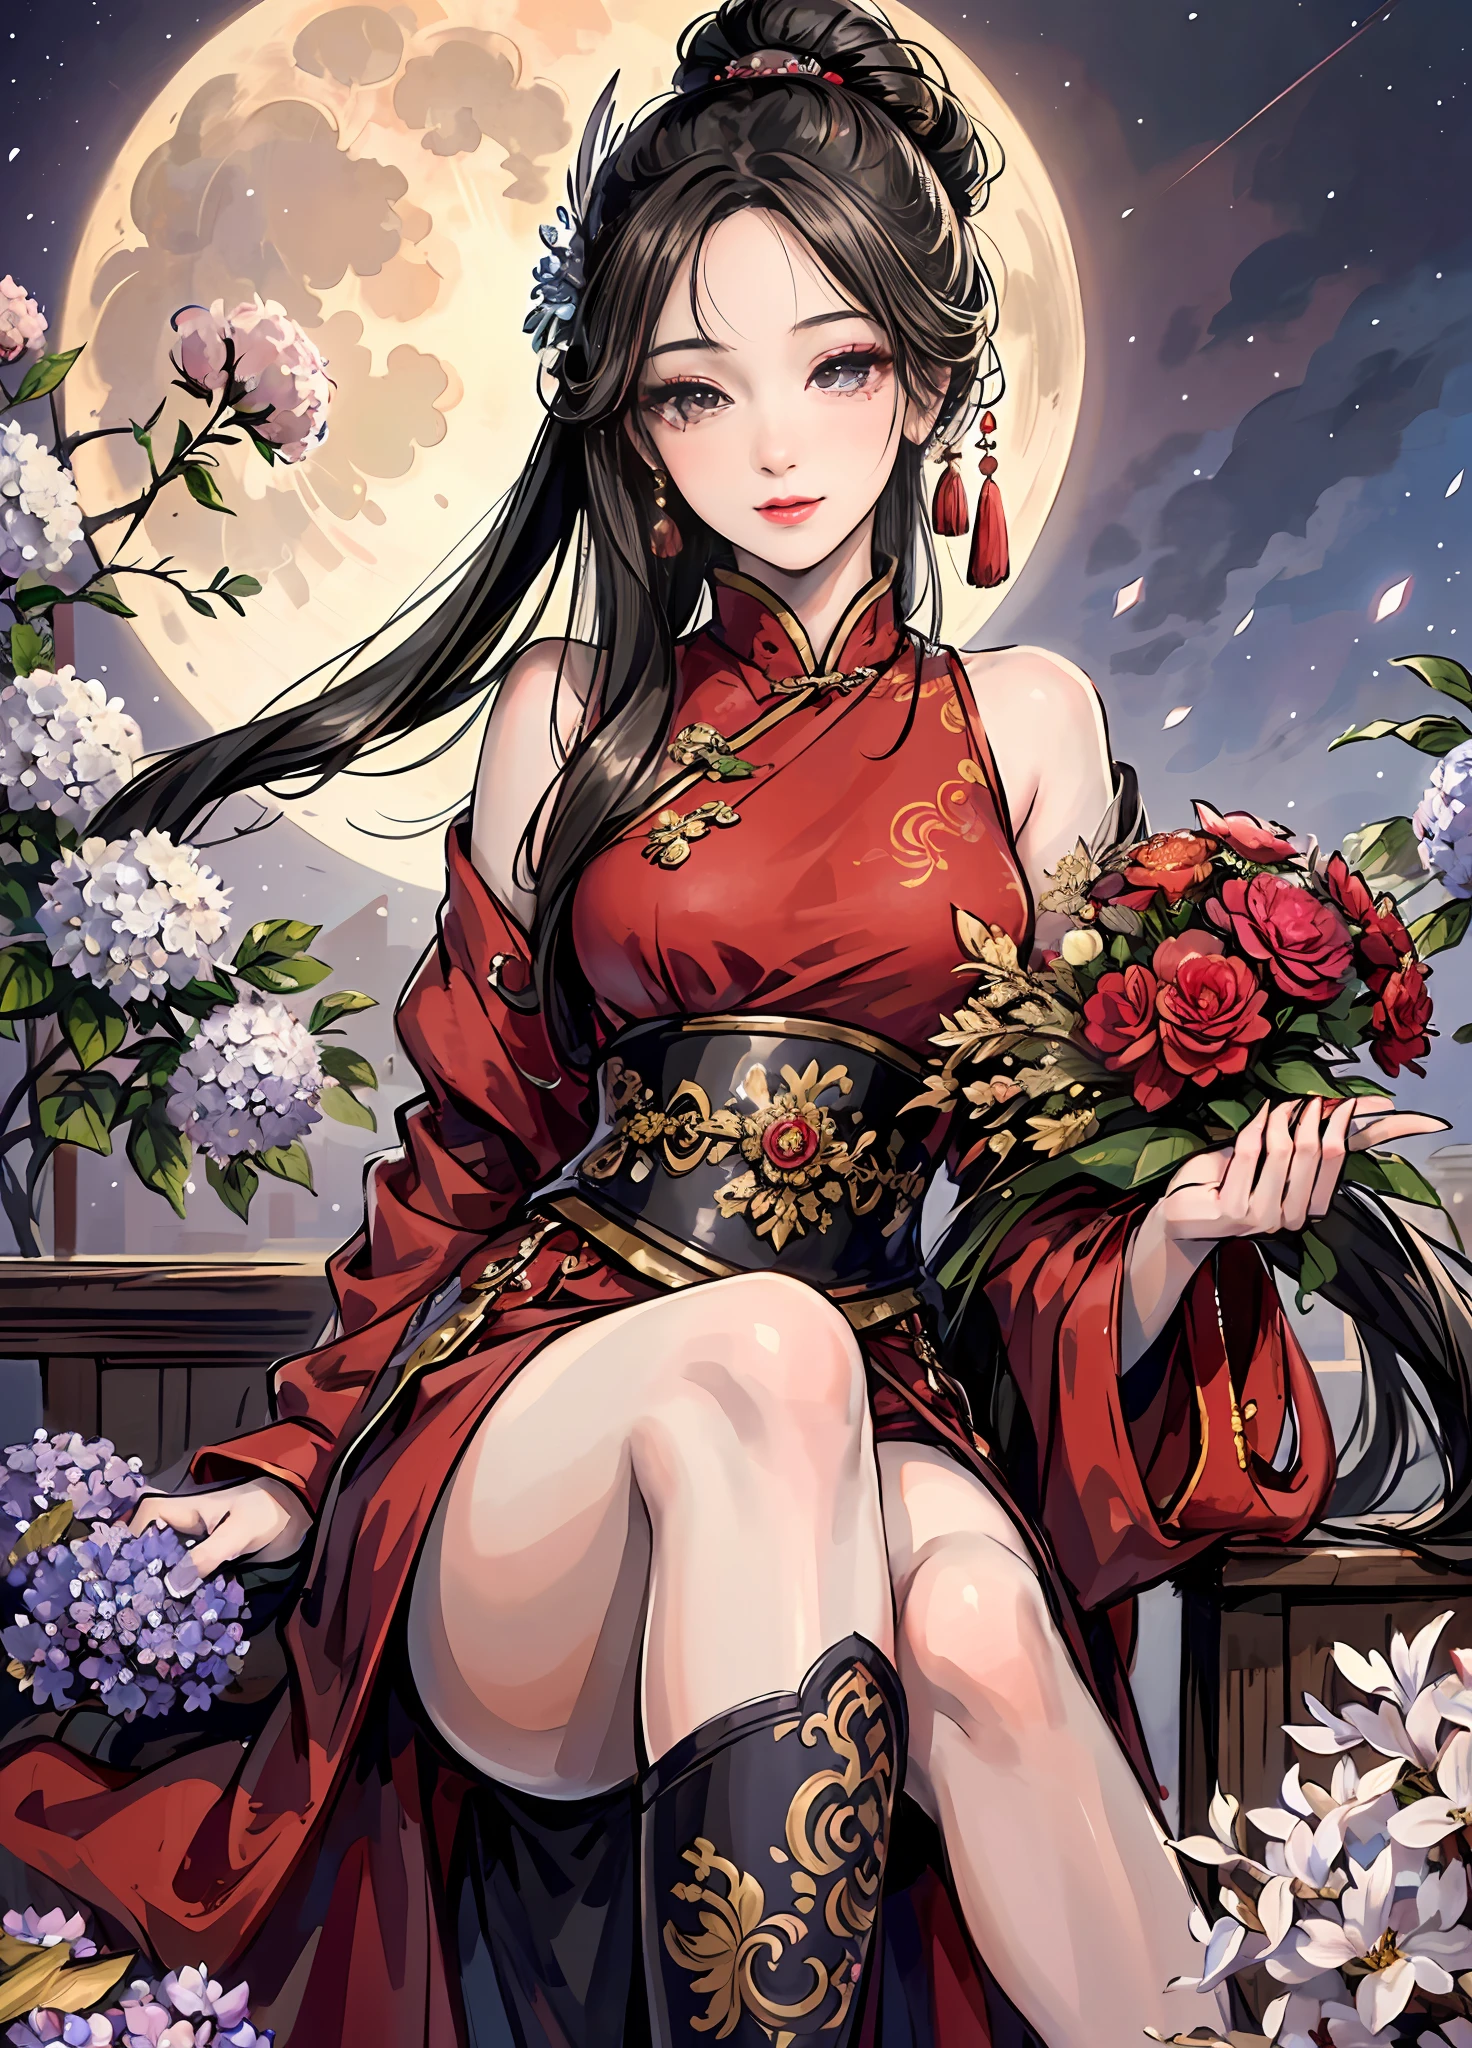 Masterpiece, Superb Product, Night, Full Moon, 1 Woman, Mature Woman, Chinese Style, Antique Chinese, Sister, Royal Sister, Smile, Brunette Hair, Updo, Red Lips, Calm, Intellectual, Hairpin, Hair Flower, Detailed Facial Details, Detailed Eyes, Full Body, Gray Eyes, Long Hair, Hydrangeas